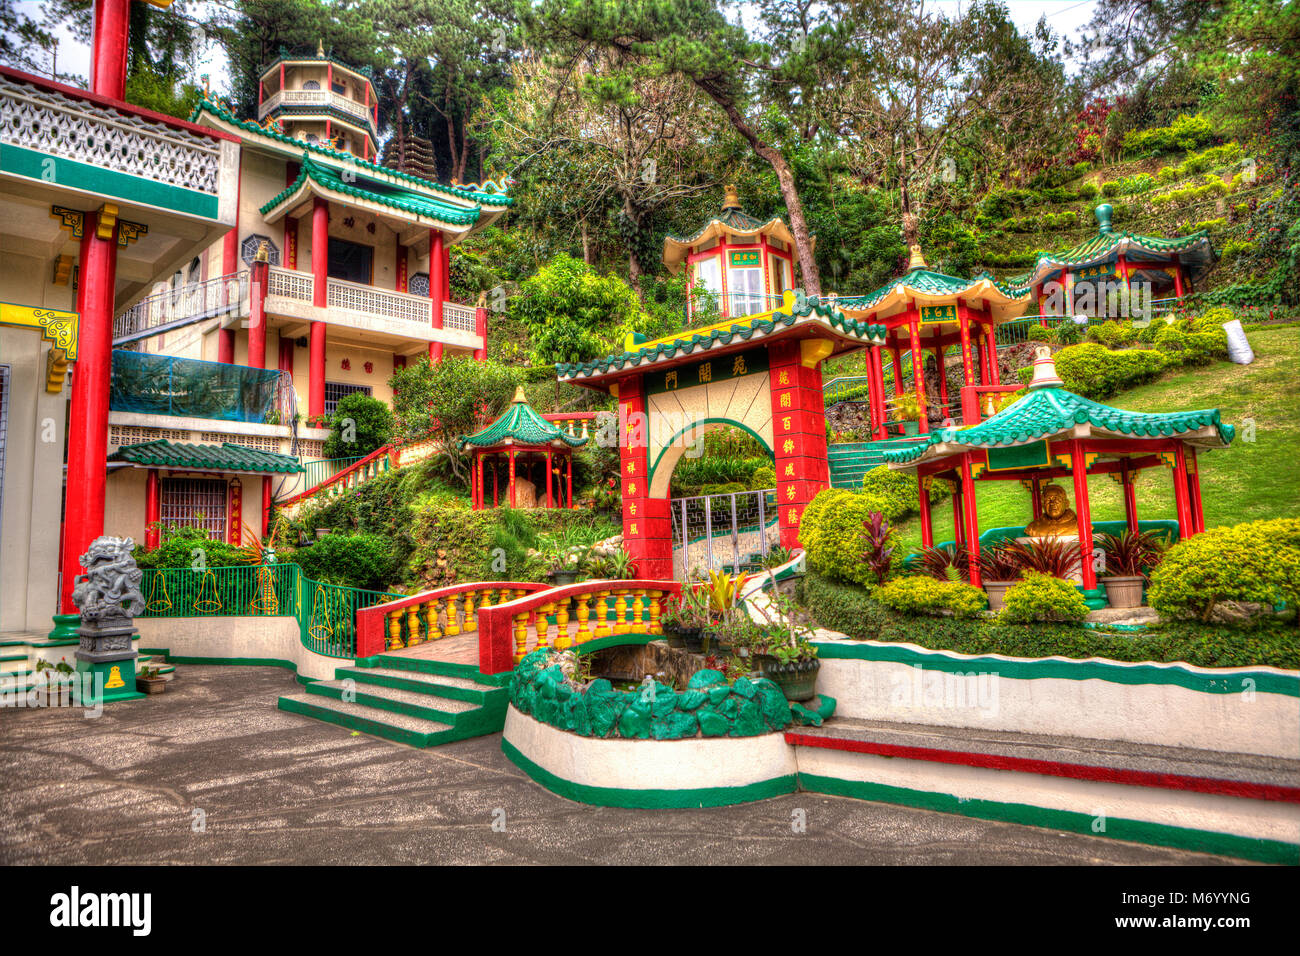 The Bell Church is a Taoist temple with gardens, temples and pagodas open to the public in Baguio City, Luzon Island, Philippines. Stock Photo